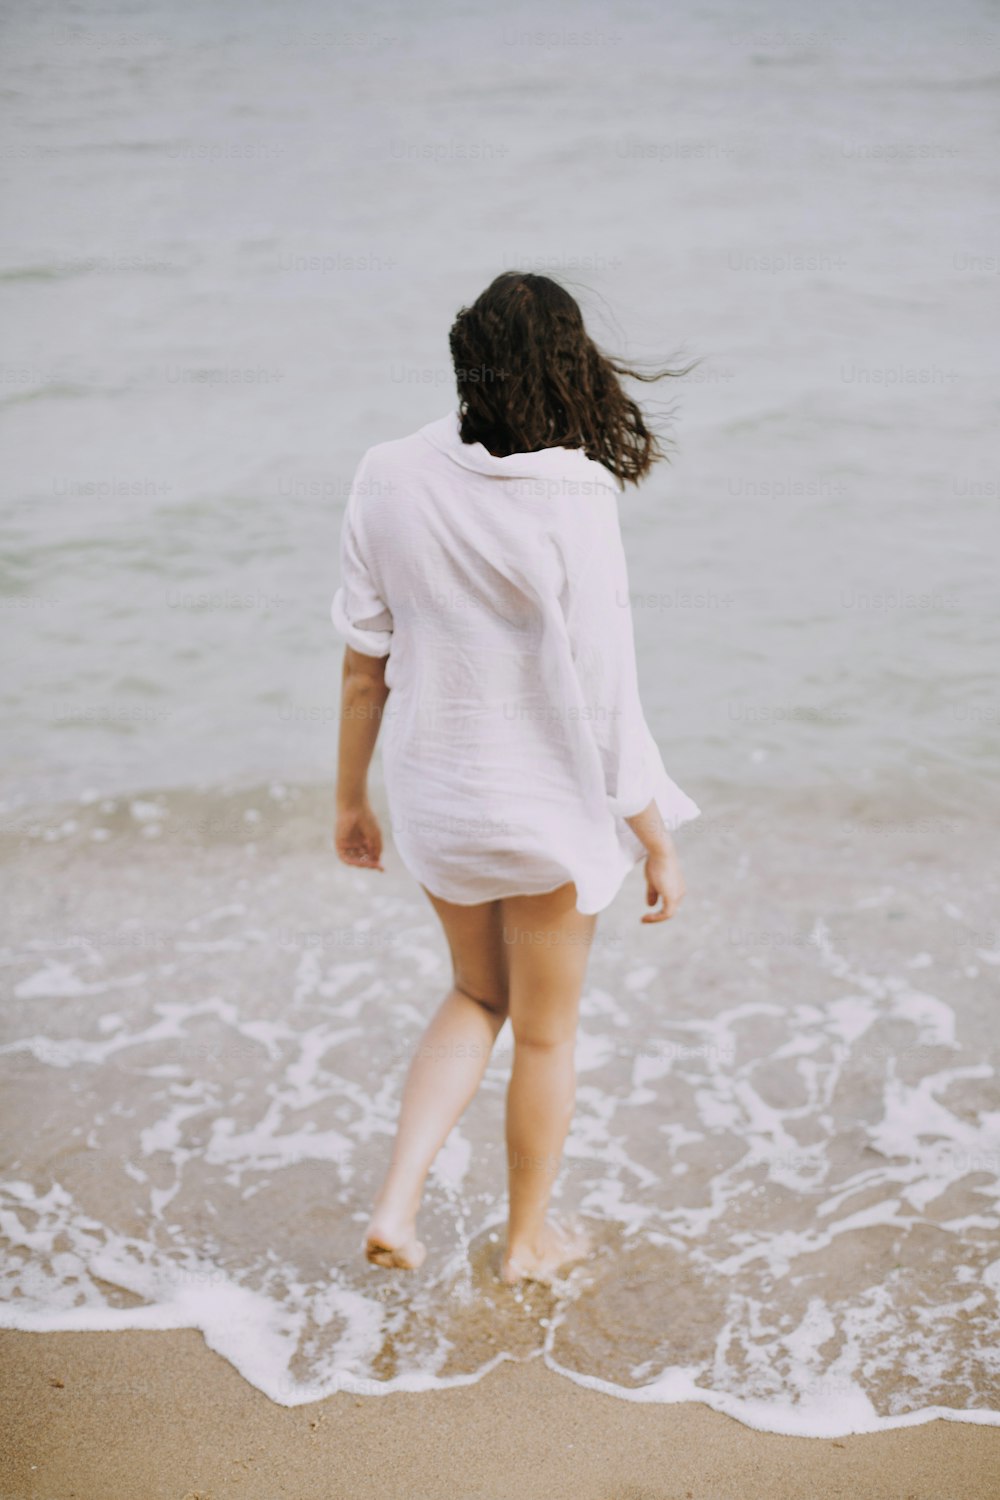 Defocused boho girl in white shirt walking on beach at sea waves. Happy young woman relaxing on seashore. Summer vacation. Mindfulness and relaxation. Lifestyle